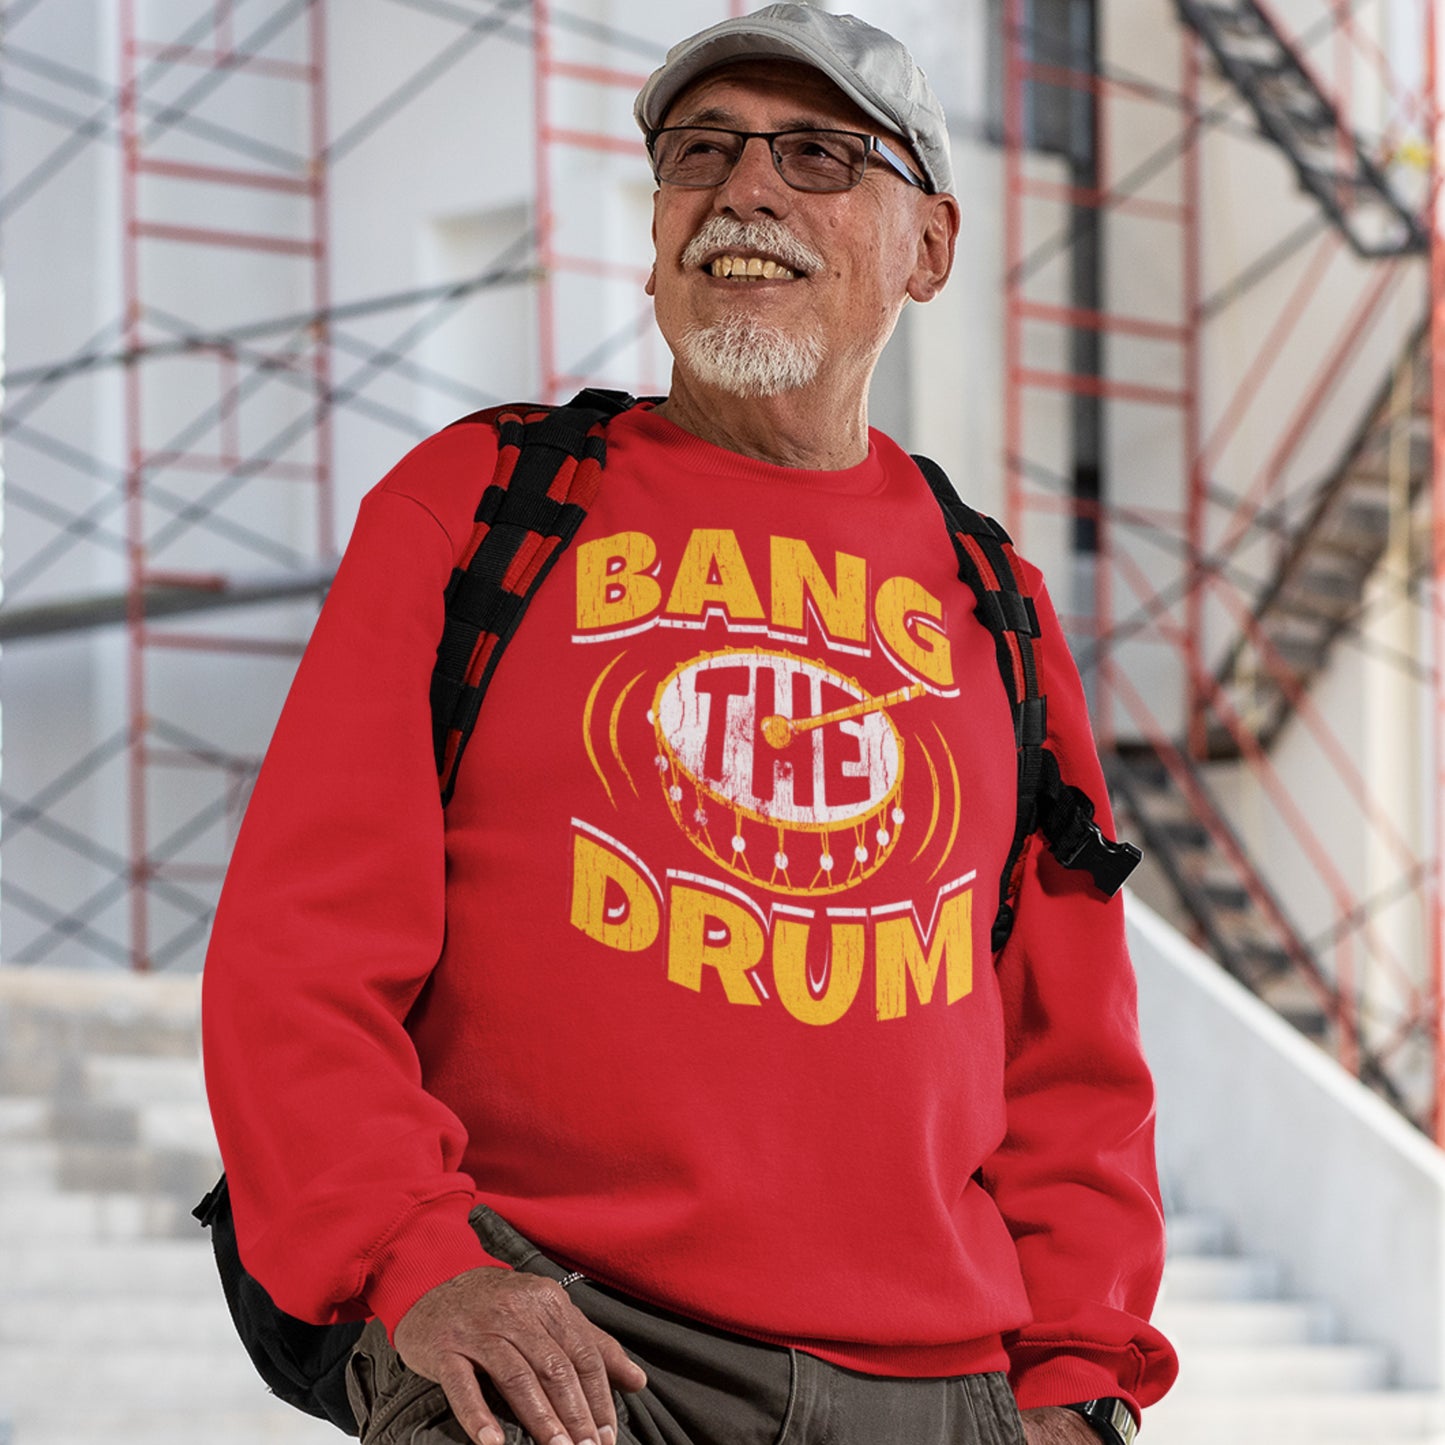 KC Swag Kansas City Chiefs Distressed White & Gold Band The Drum on a Red Crewneck Sweatshirt worn by an older male model wearing a hat and backpack standing on stairs in front of a construction scaffold